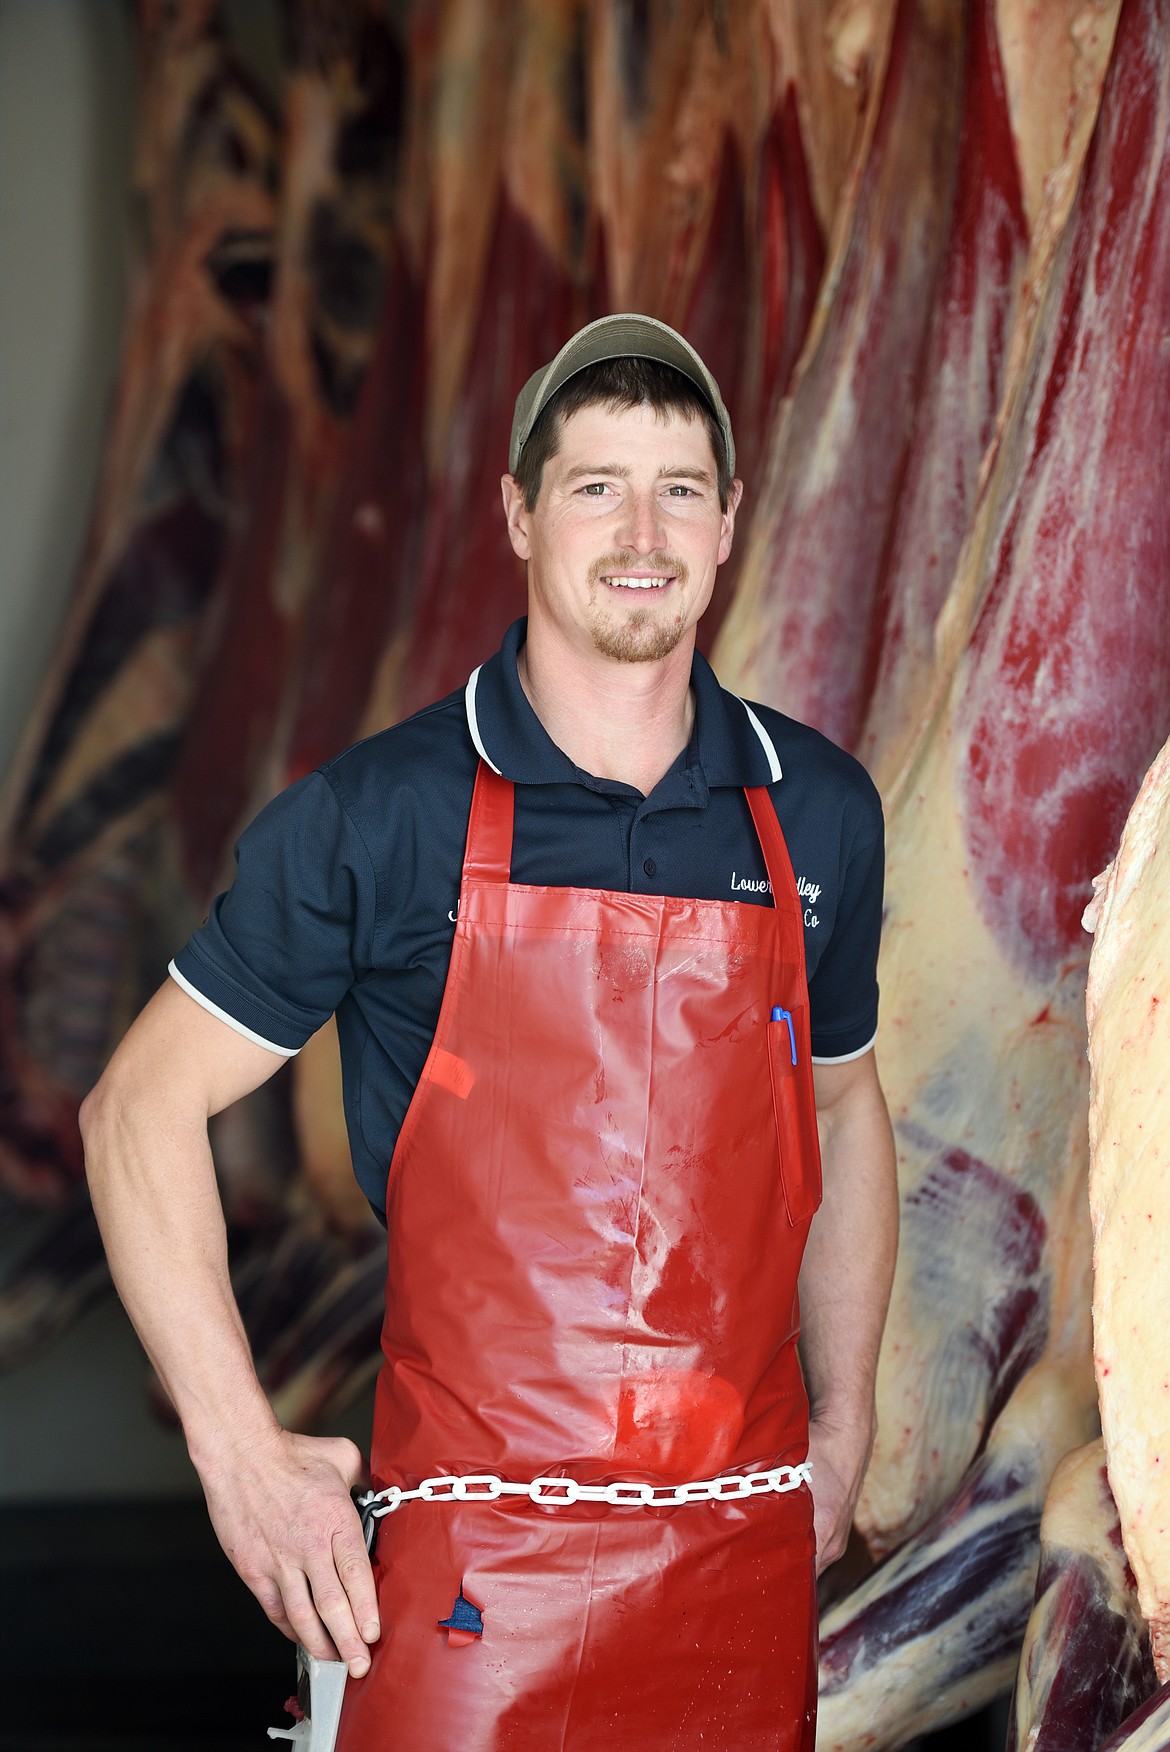 Jeremy Plummer is the third generation of his family to work in the family-owned meat-processing business. Jeremy&#146;s grandfather, Charles Plummer, started the business in 1974, and his father, Wes Plummer, was the second generation to carry on the business. (Brenda Ahearn/Flathead Journal)